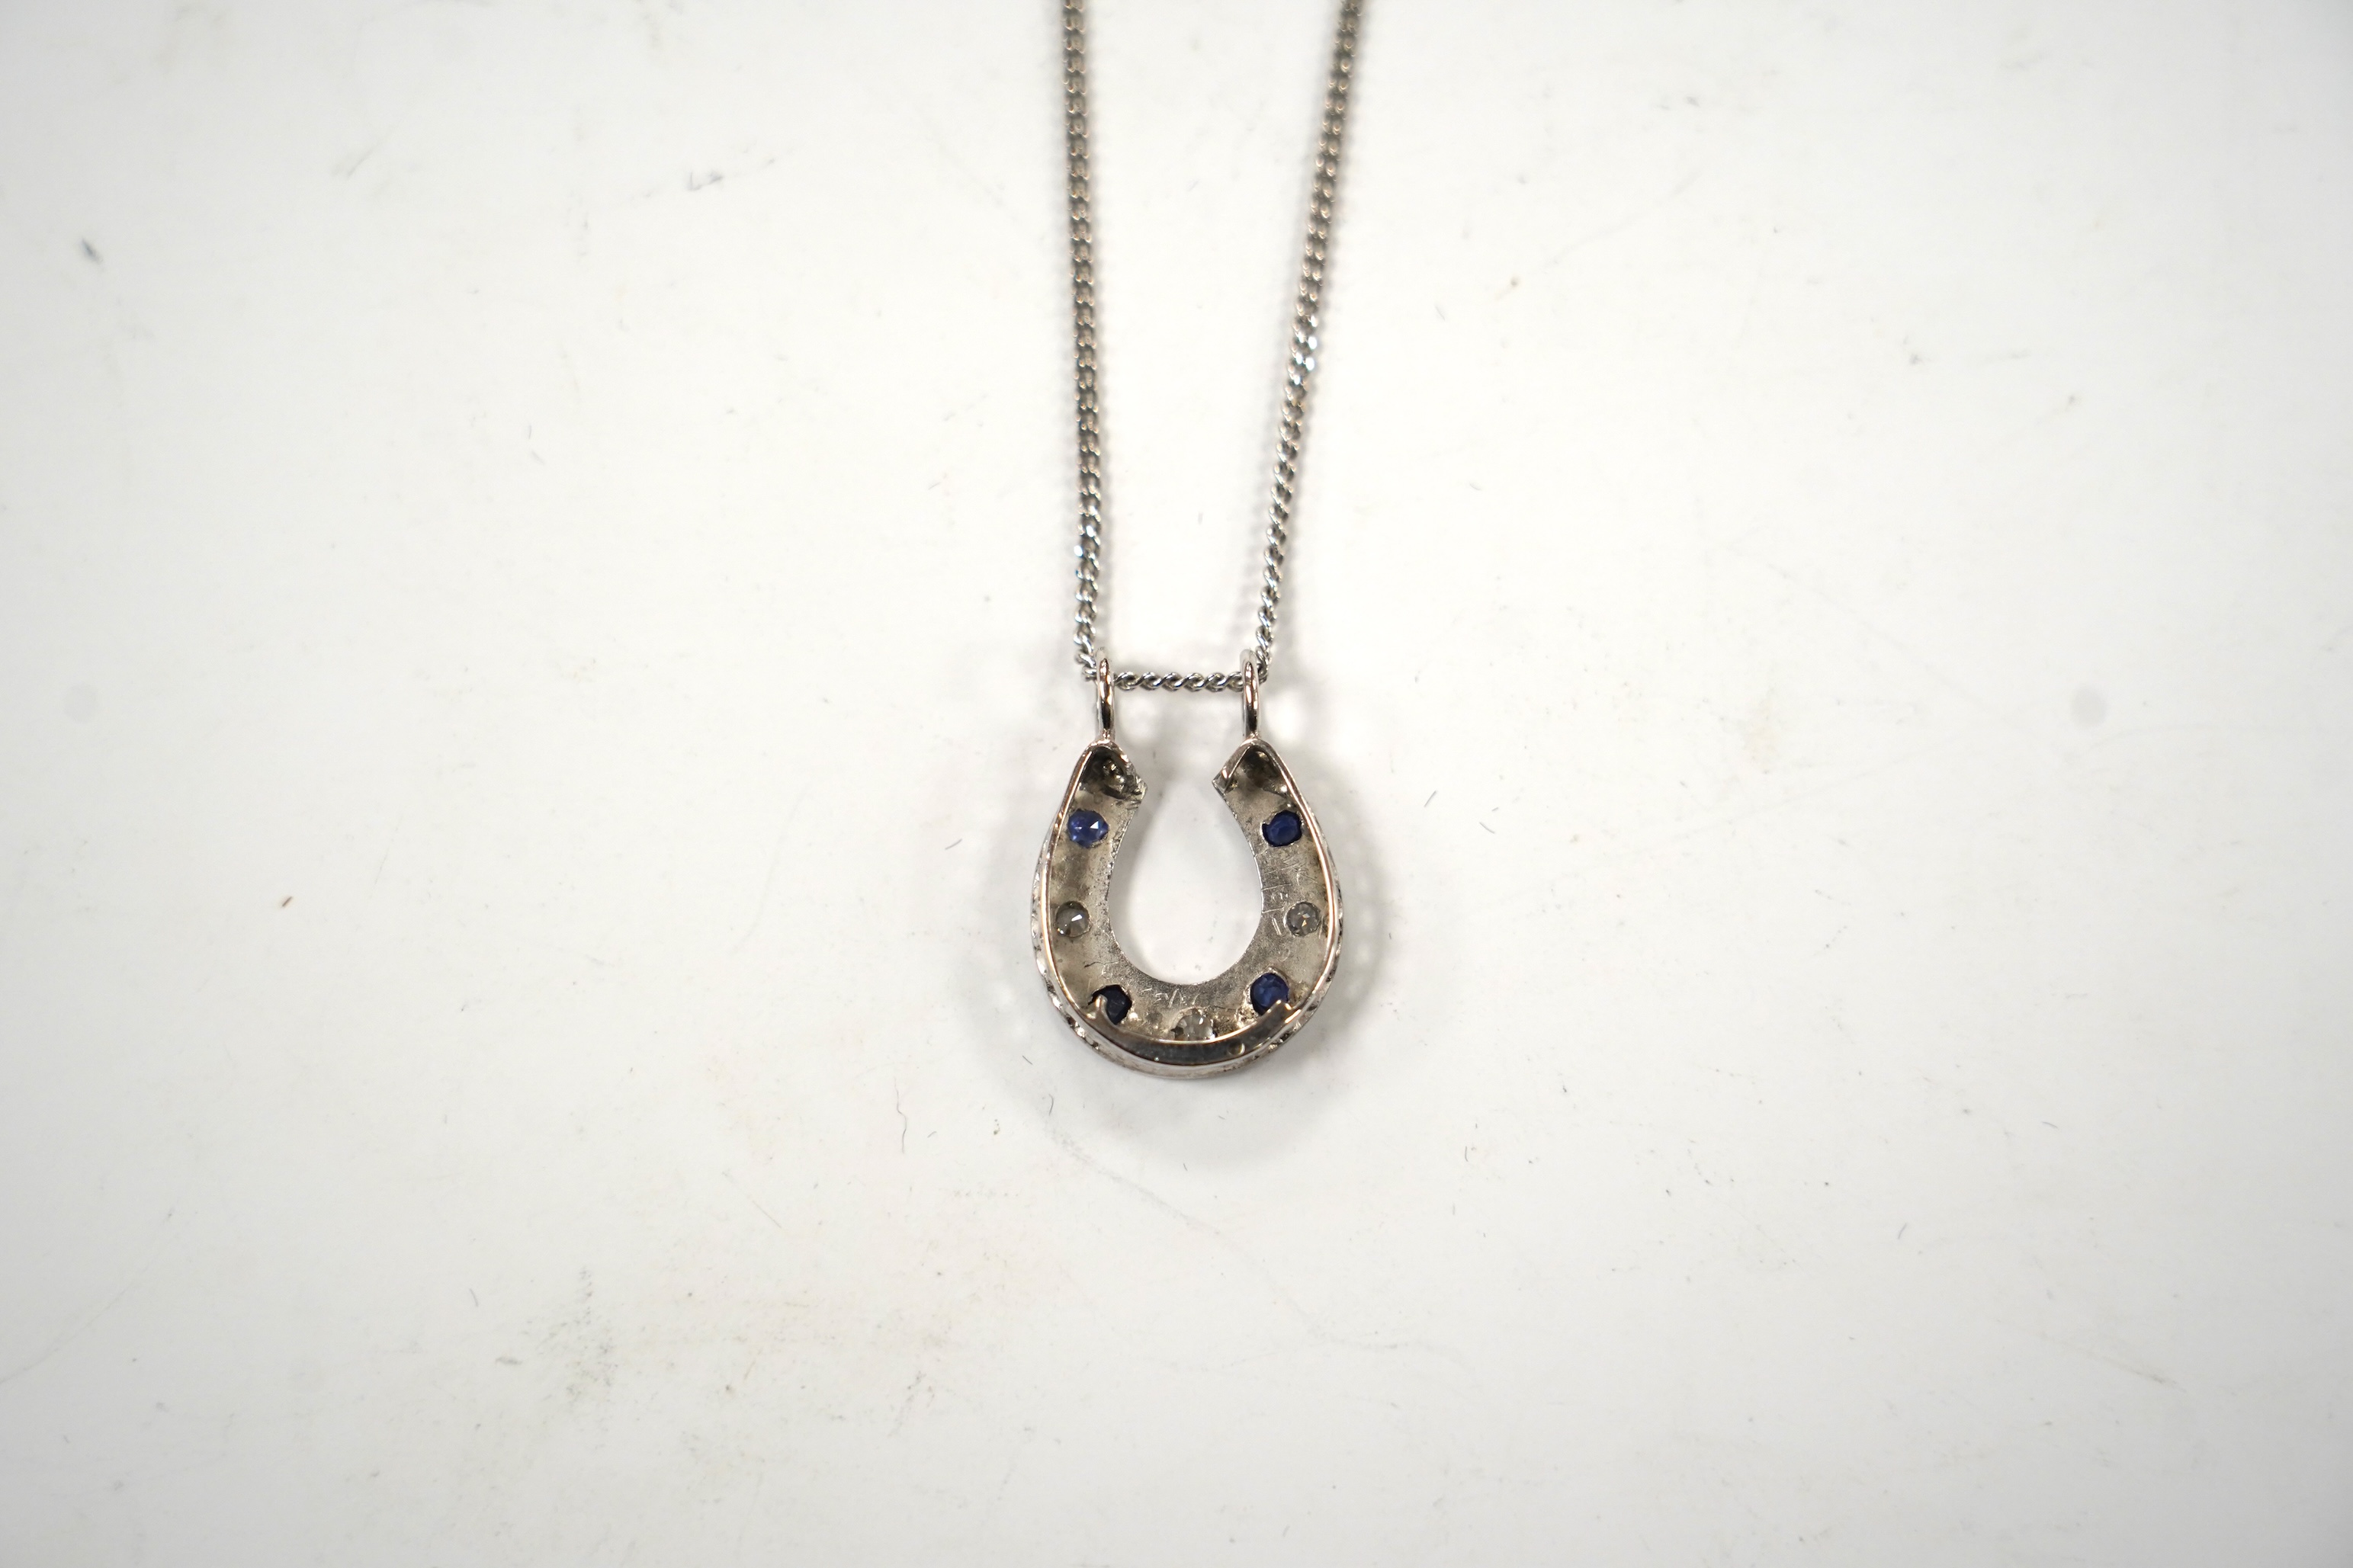 A modern 18ct white gold, sapphire and diamond set horseshoe pendant on chain, overall 44cm, gross weight 5.5 grams. Condition - fair